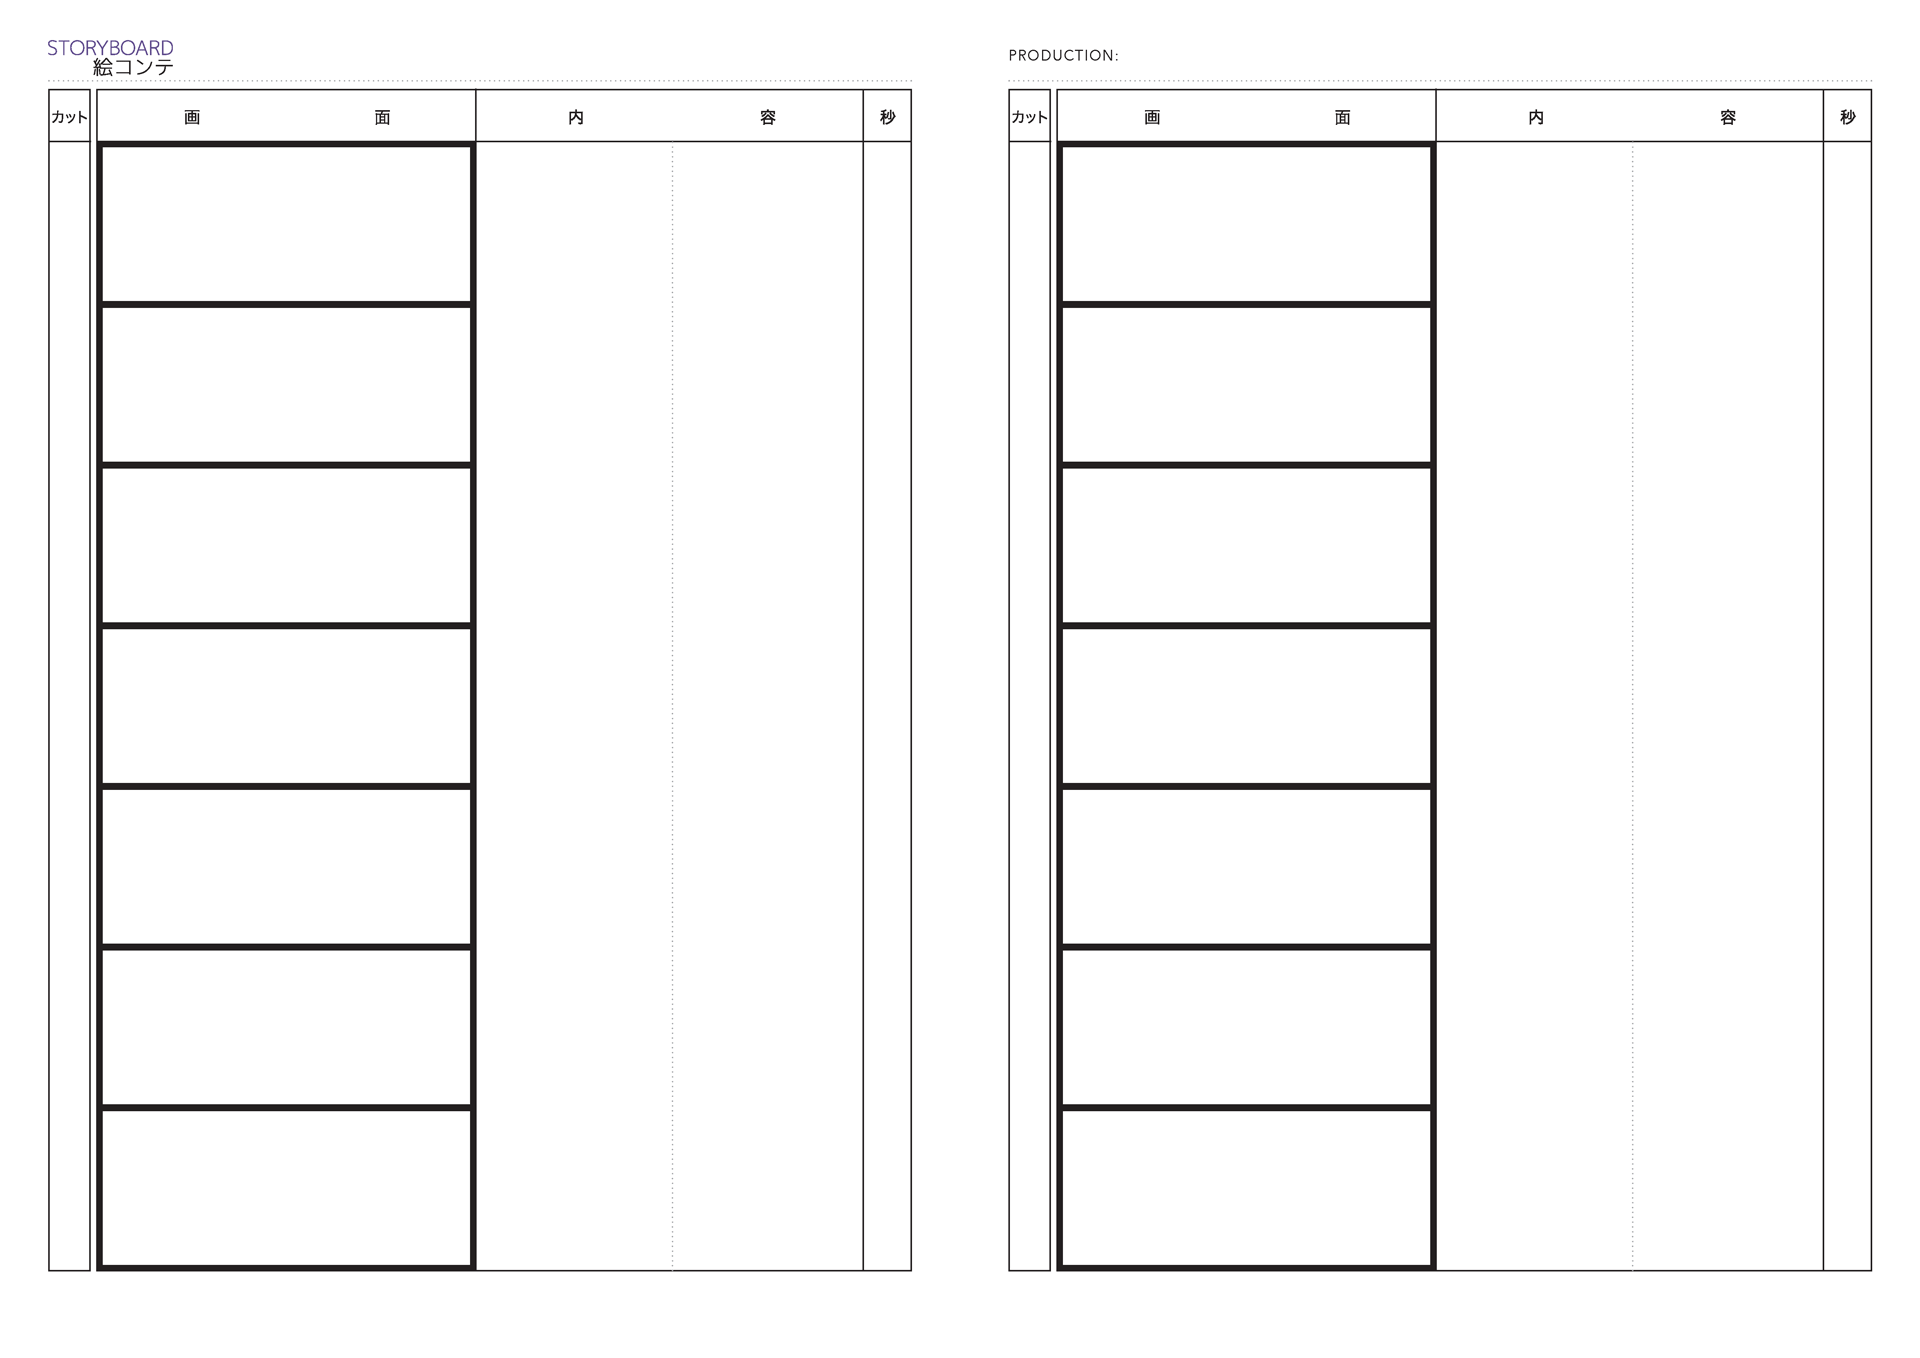 Free Anime Storyboard Templates For 2 39 1 Films in Japanese 